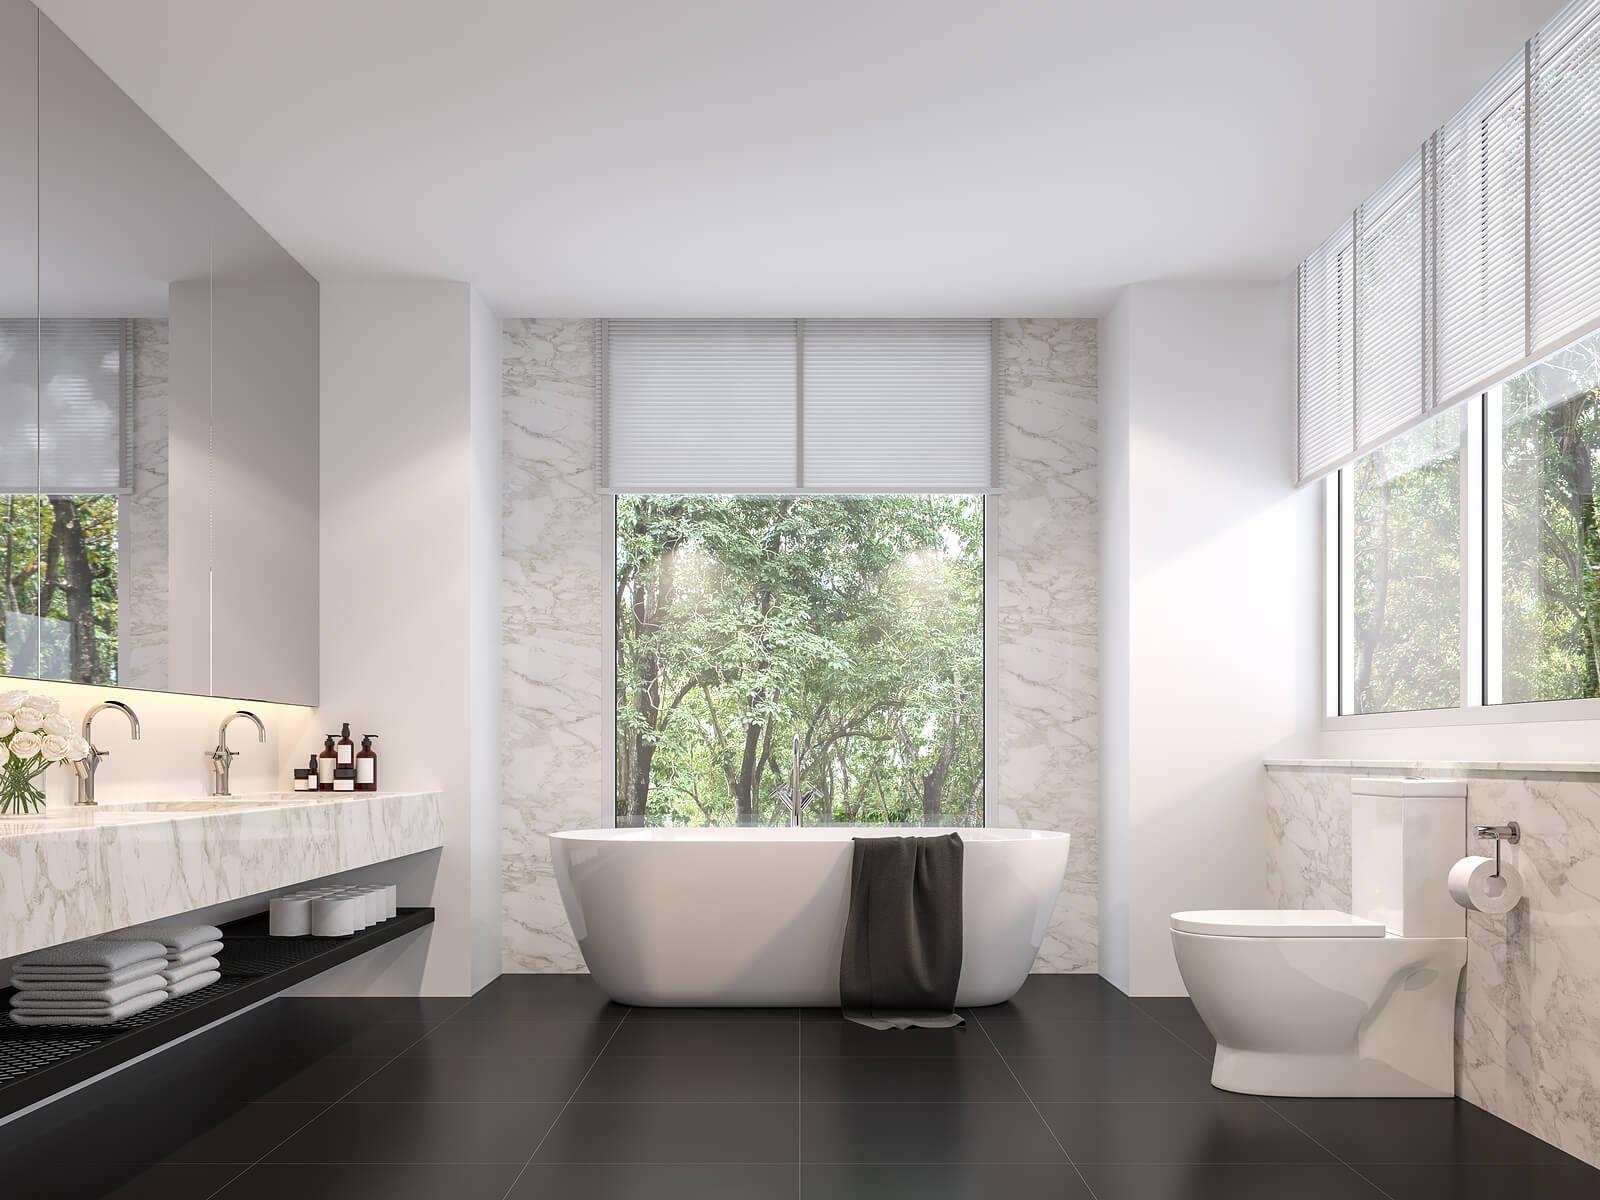 Bathroom Windows What You Should Know, Windows For Bathrooms